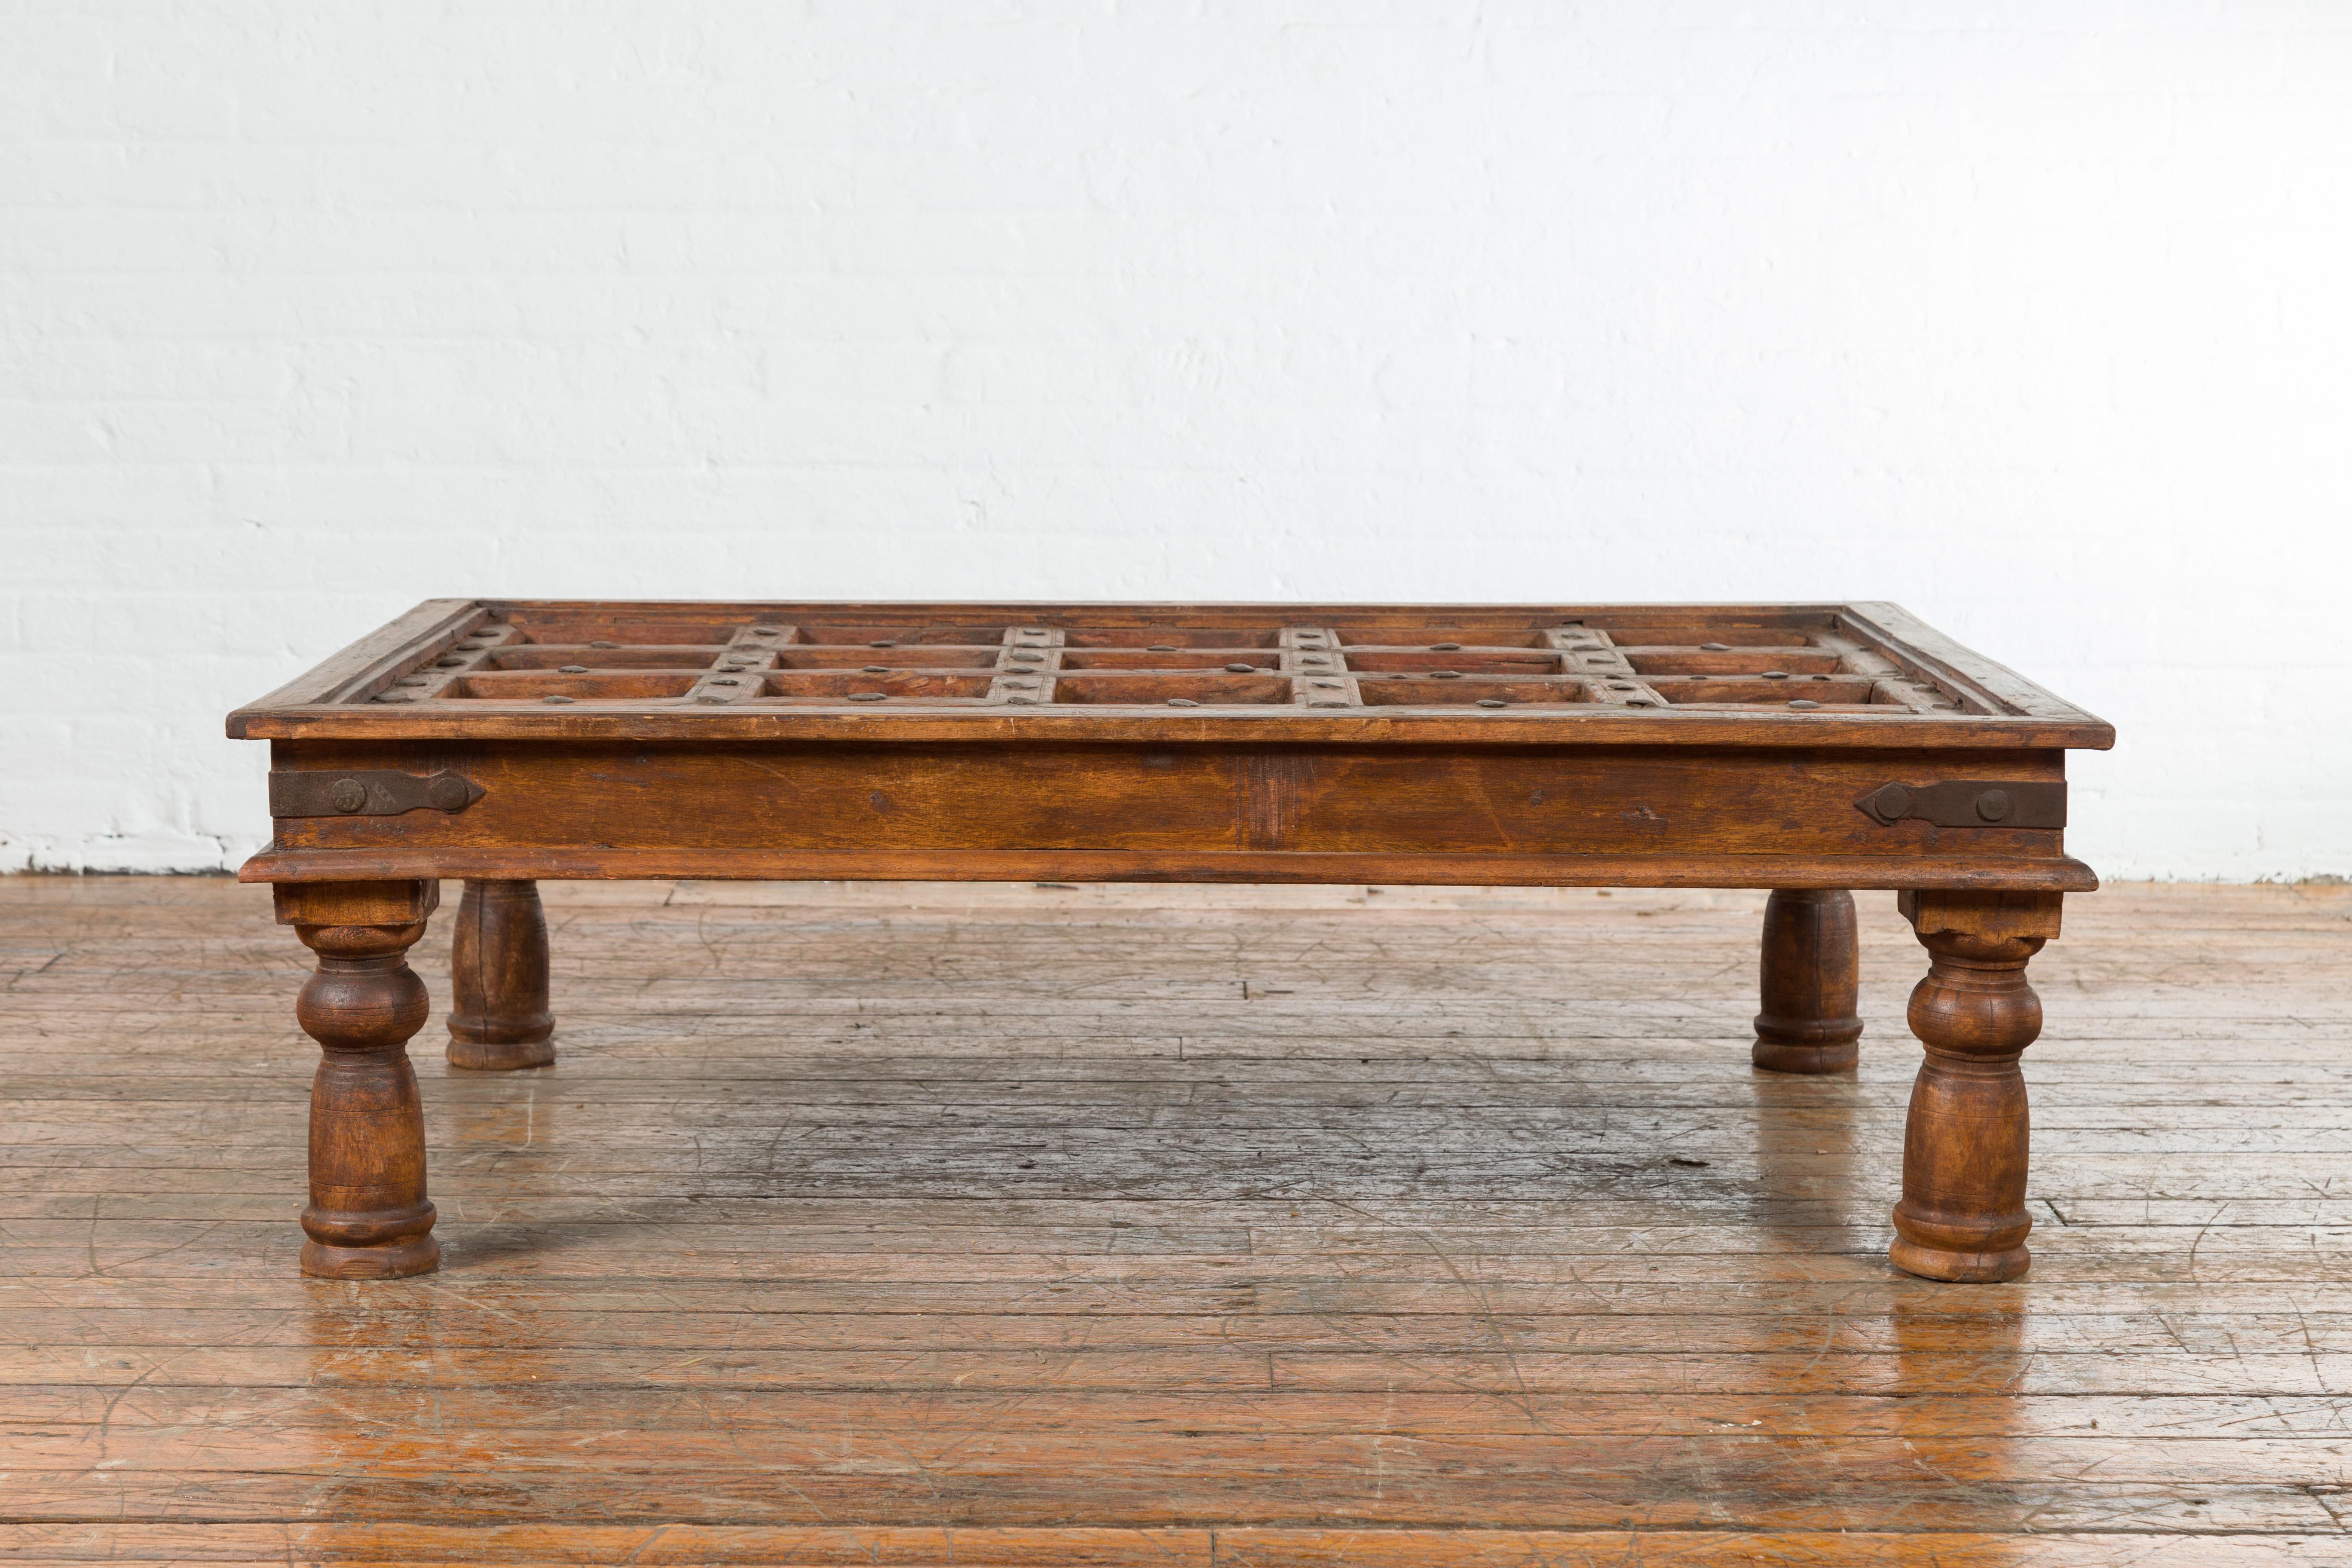 Wood Indian 19th Century Paneled Door with Iron Accents Turned into a Coffee Table